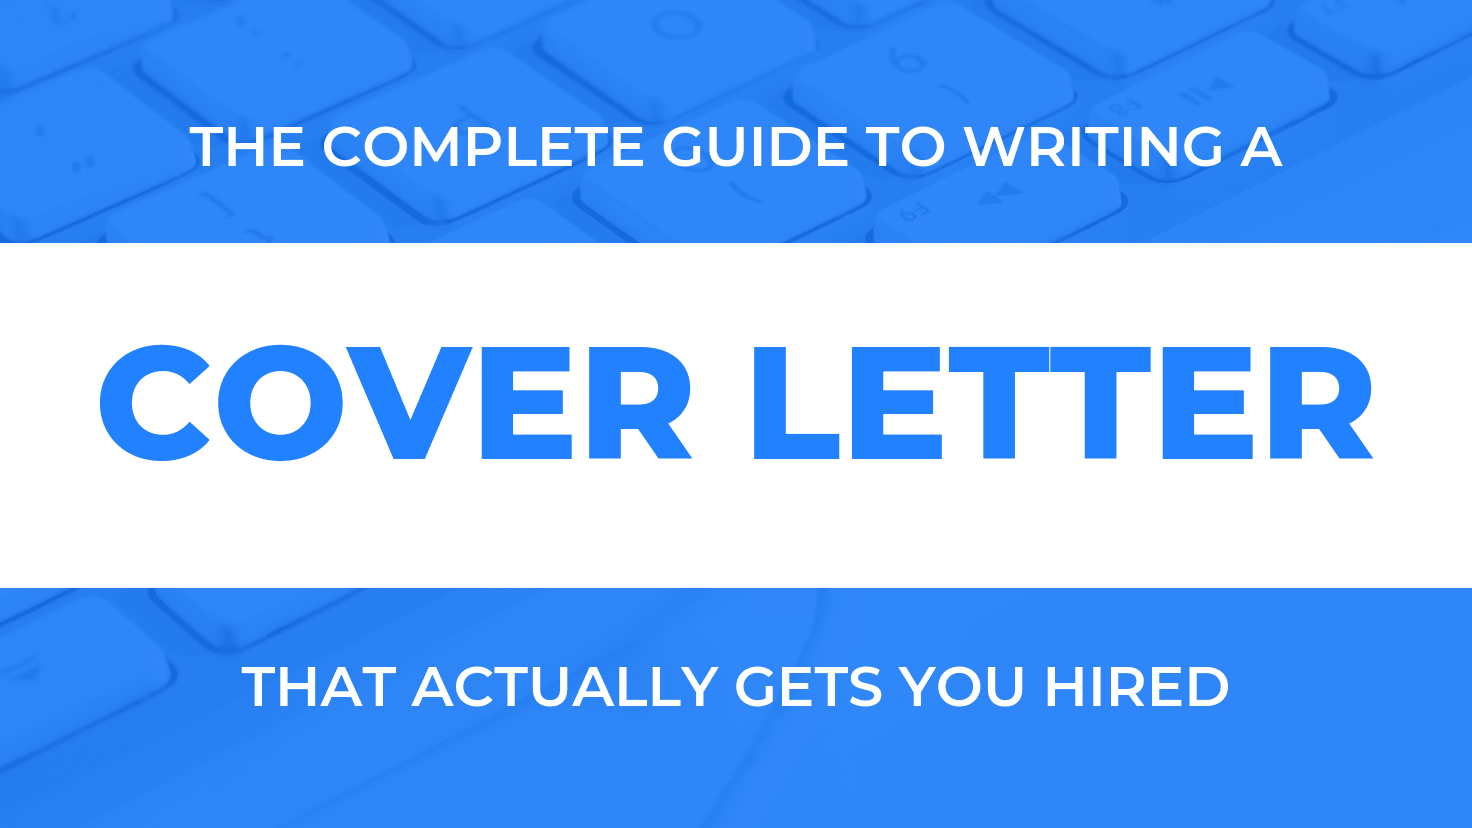 Blind Cover Letter Sample from cultivatedculture.com